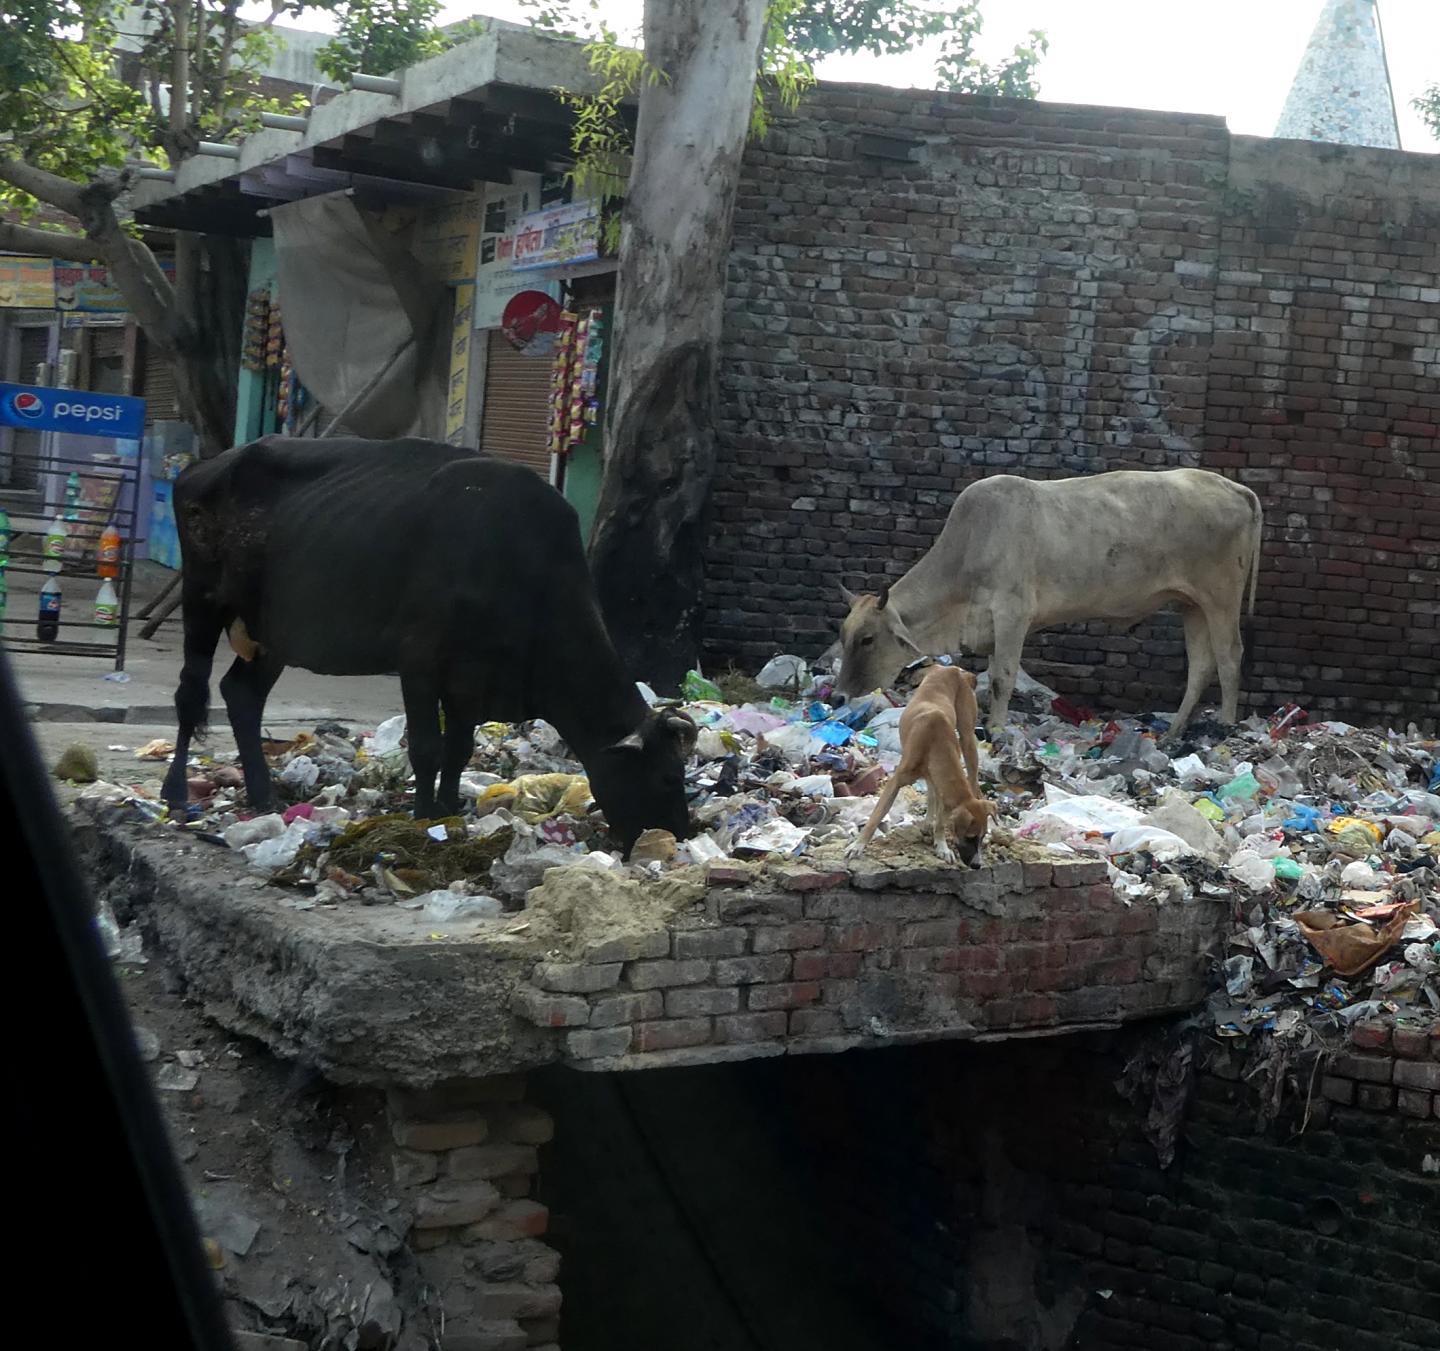 Landfill in India: An extremely useful bacterium was discovered here.